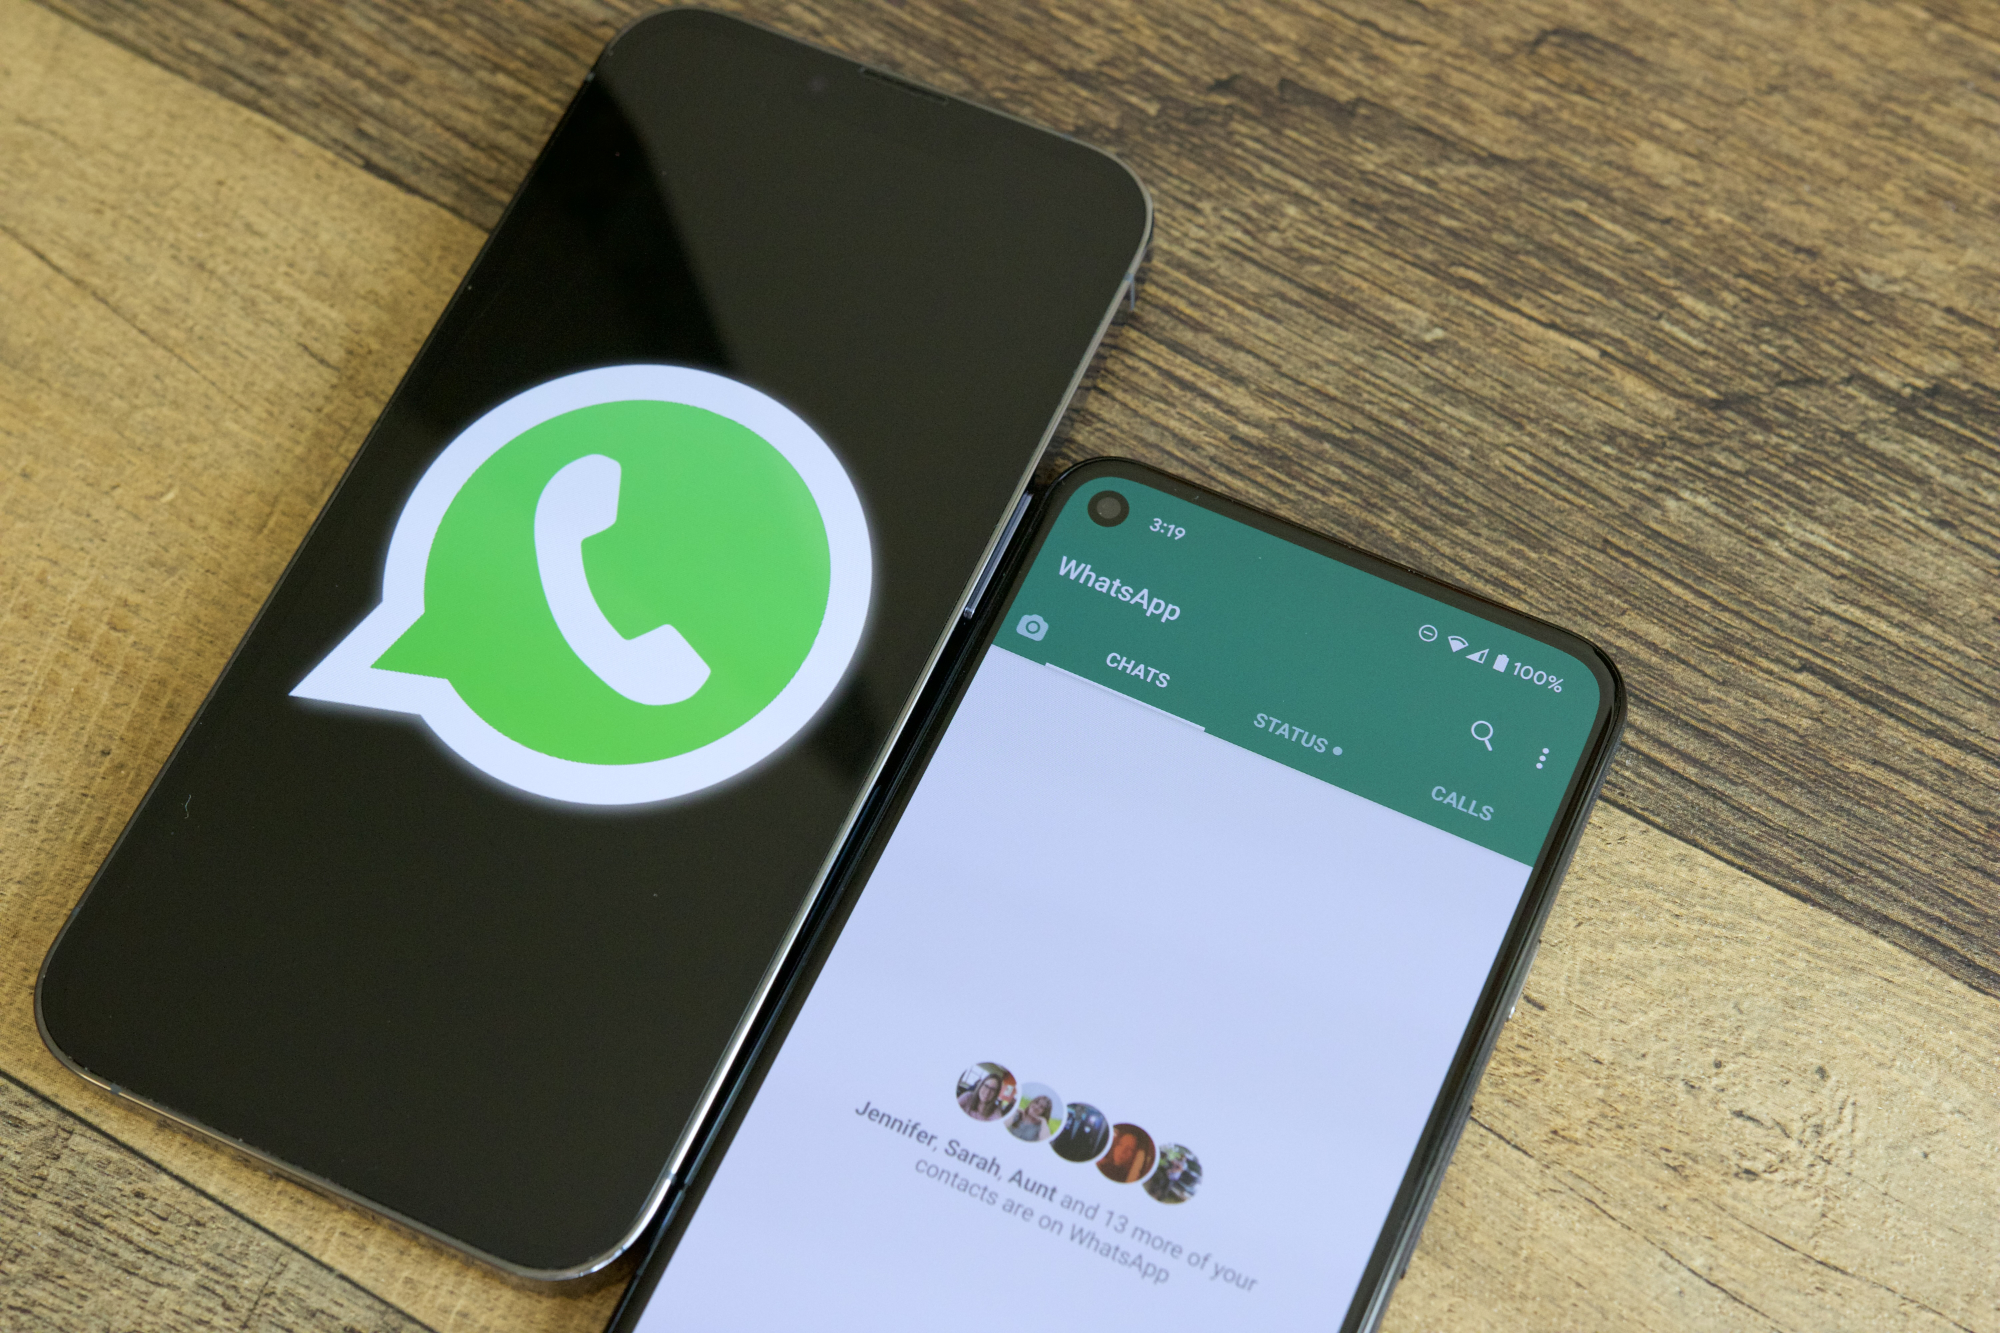 Two phones on a table next to each other. One is showing the WhatsApp logo, and the other is running the WhatsApp application.